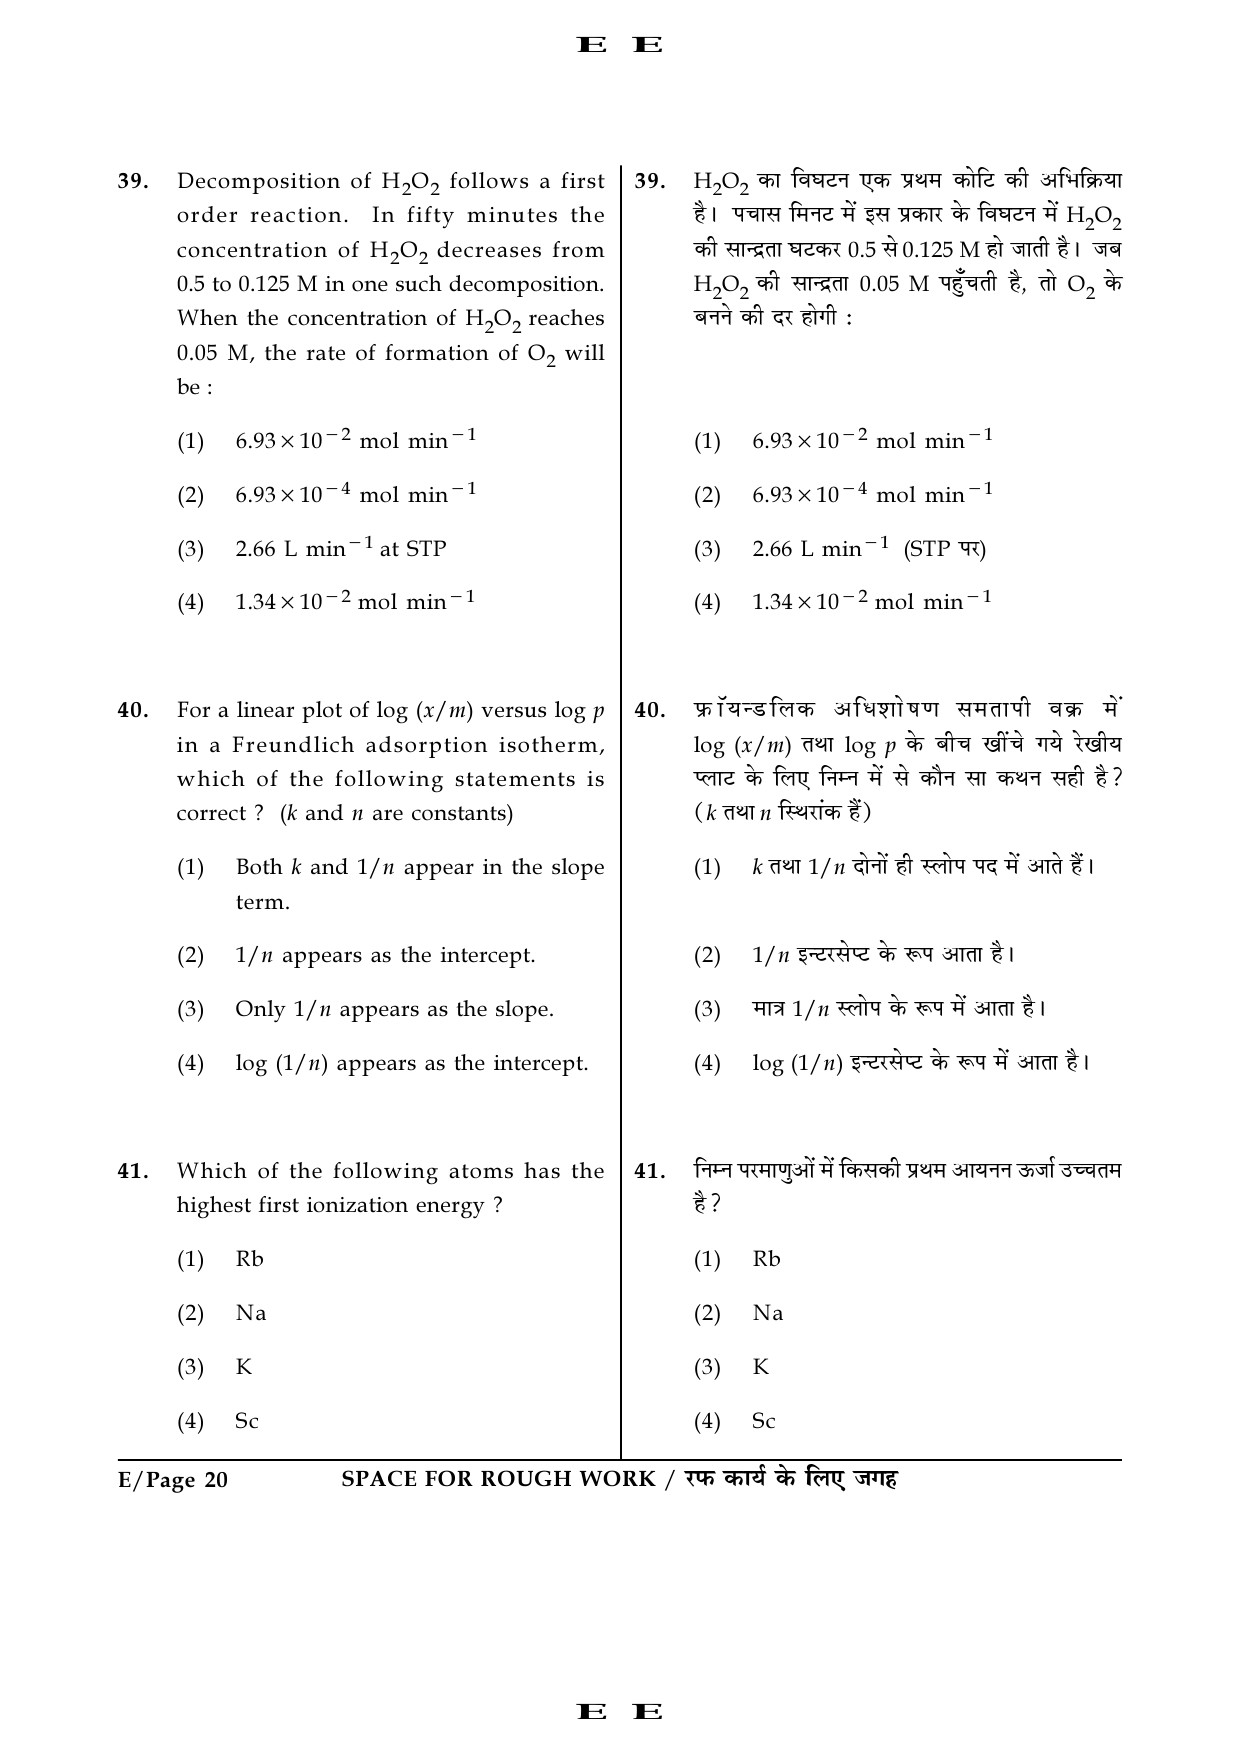 JEE Main Exam Question Paper 2016 Booklet E 20